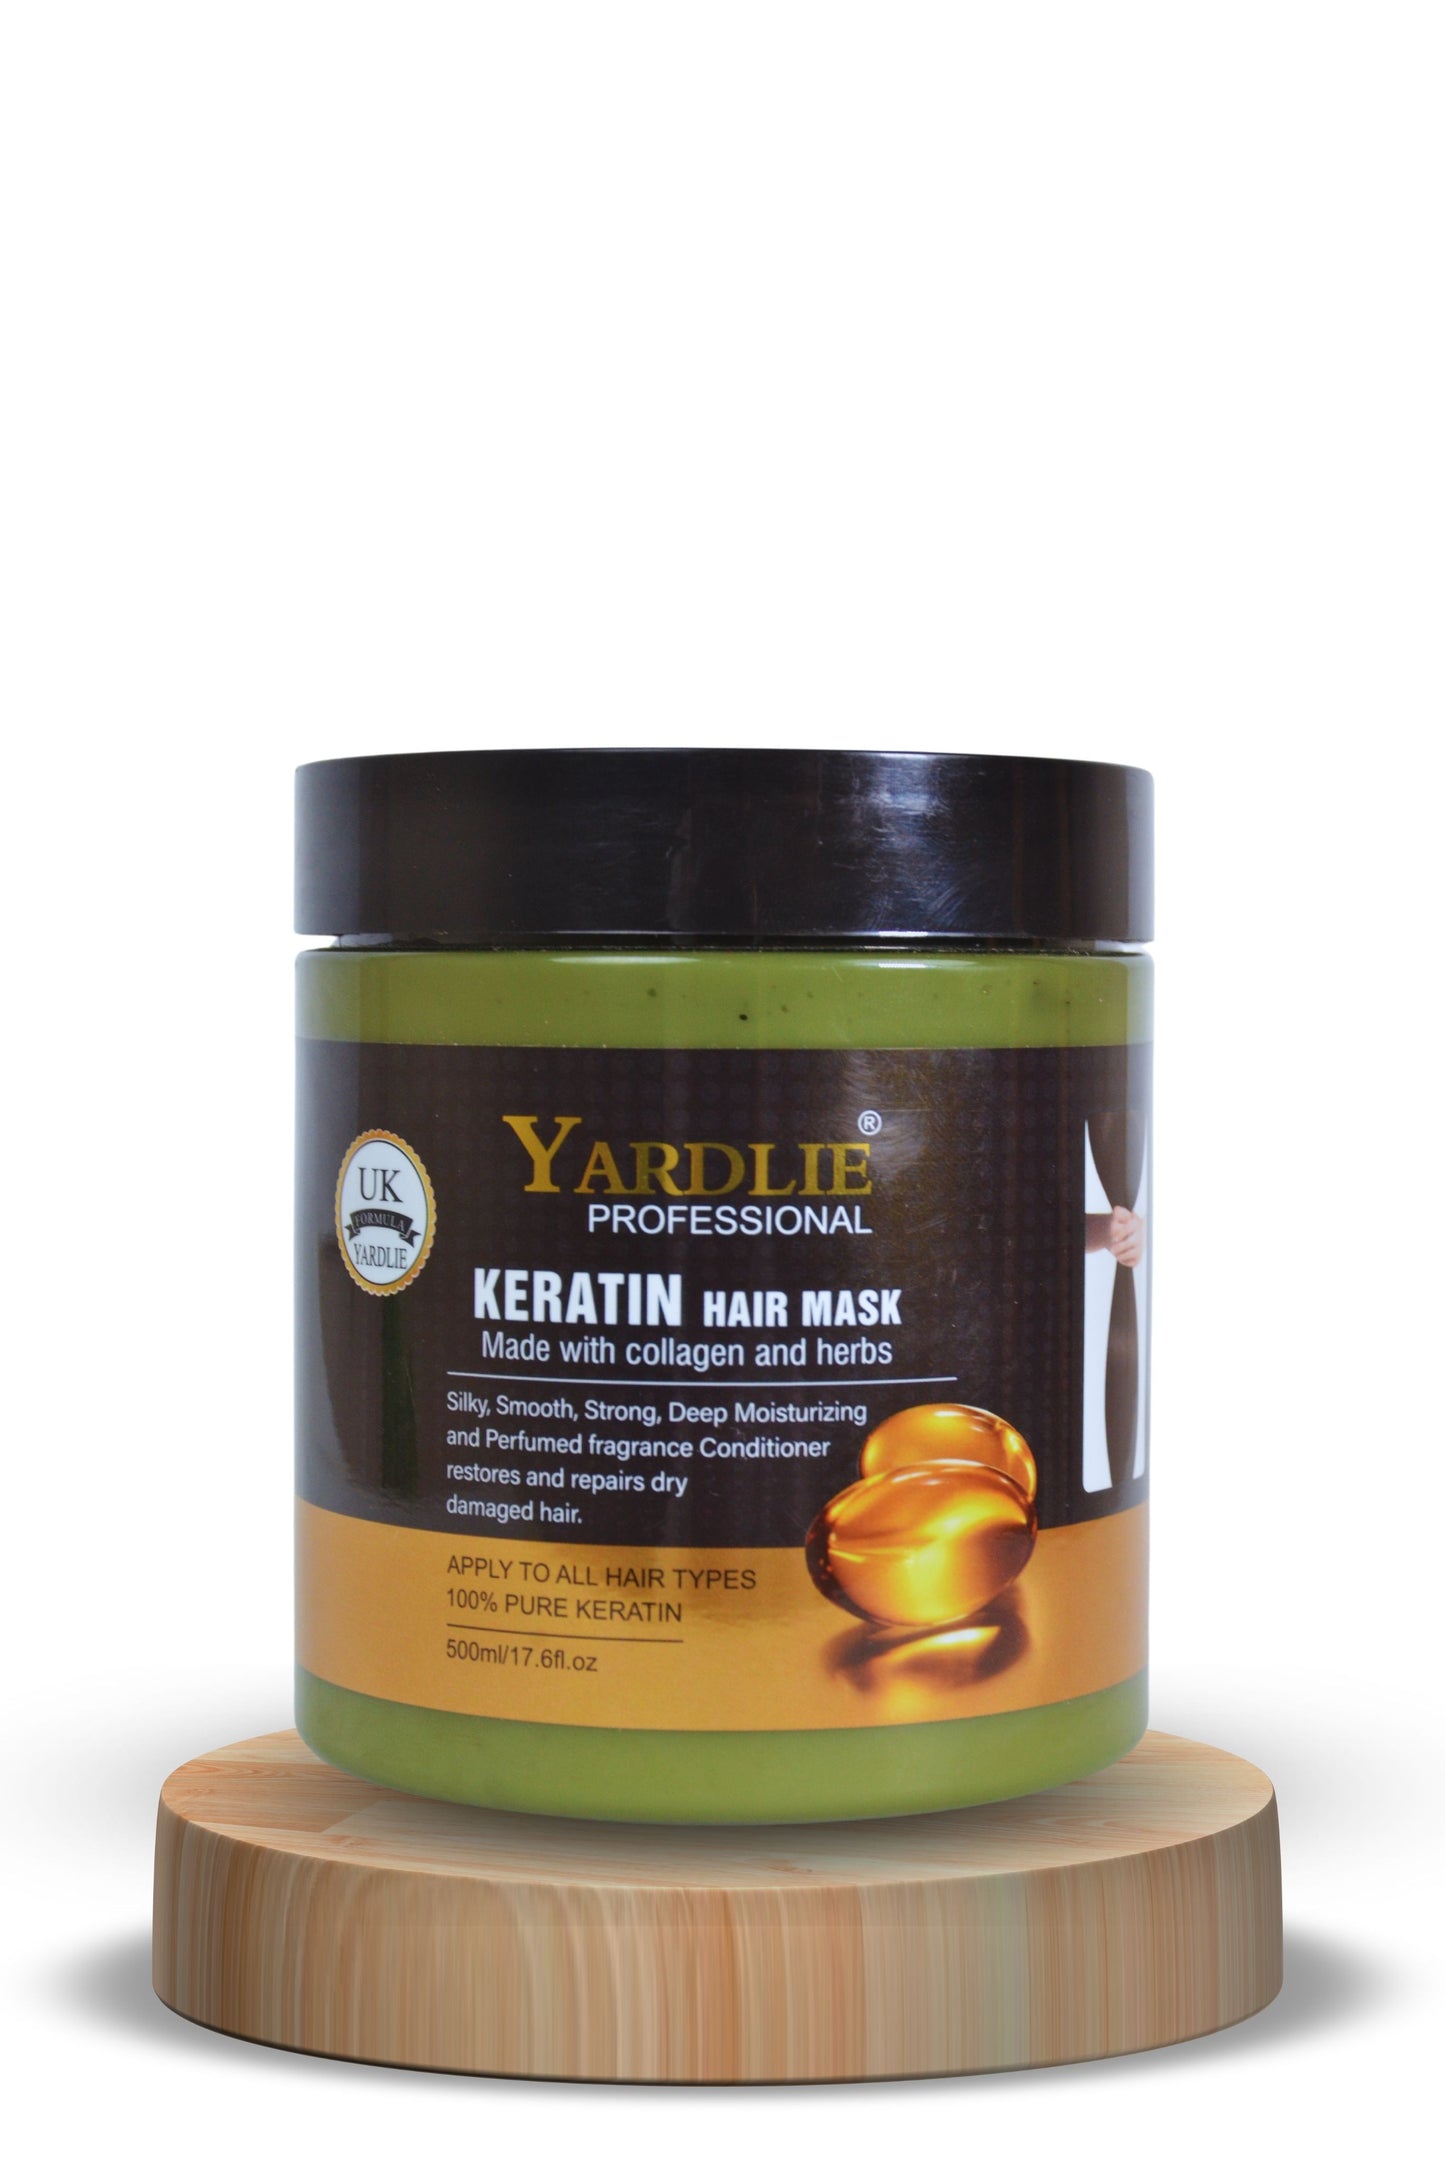 Yardlie Collagen and Herbs 2 in 1 Hair Mask & Repair Conditioner 500g.